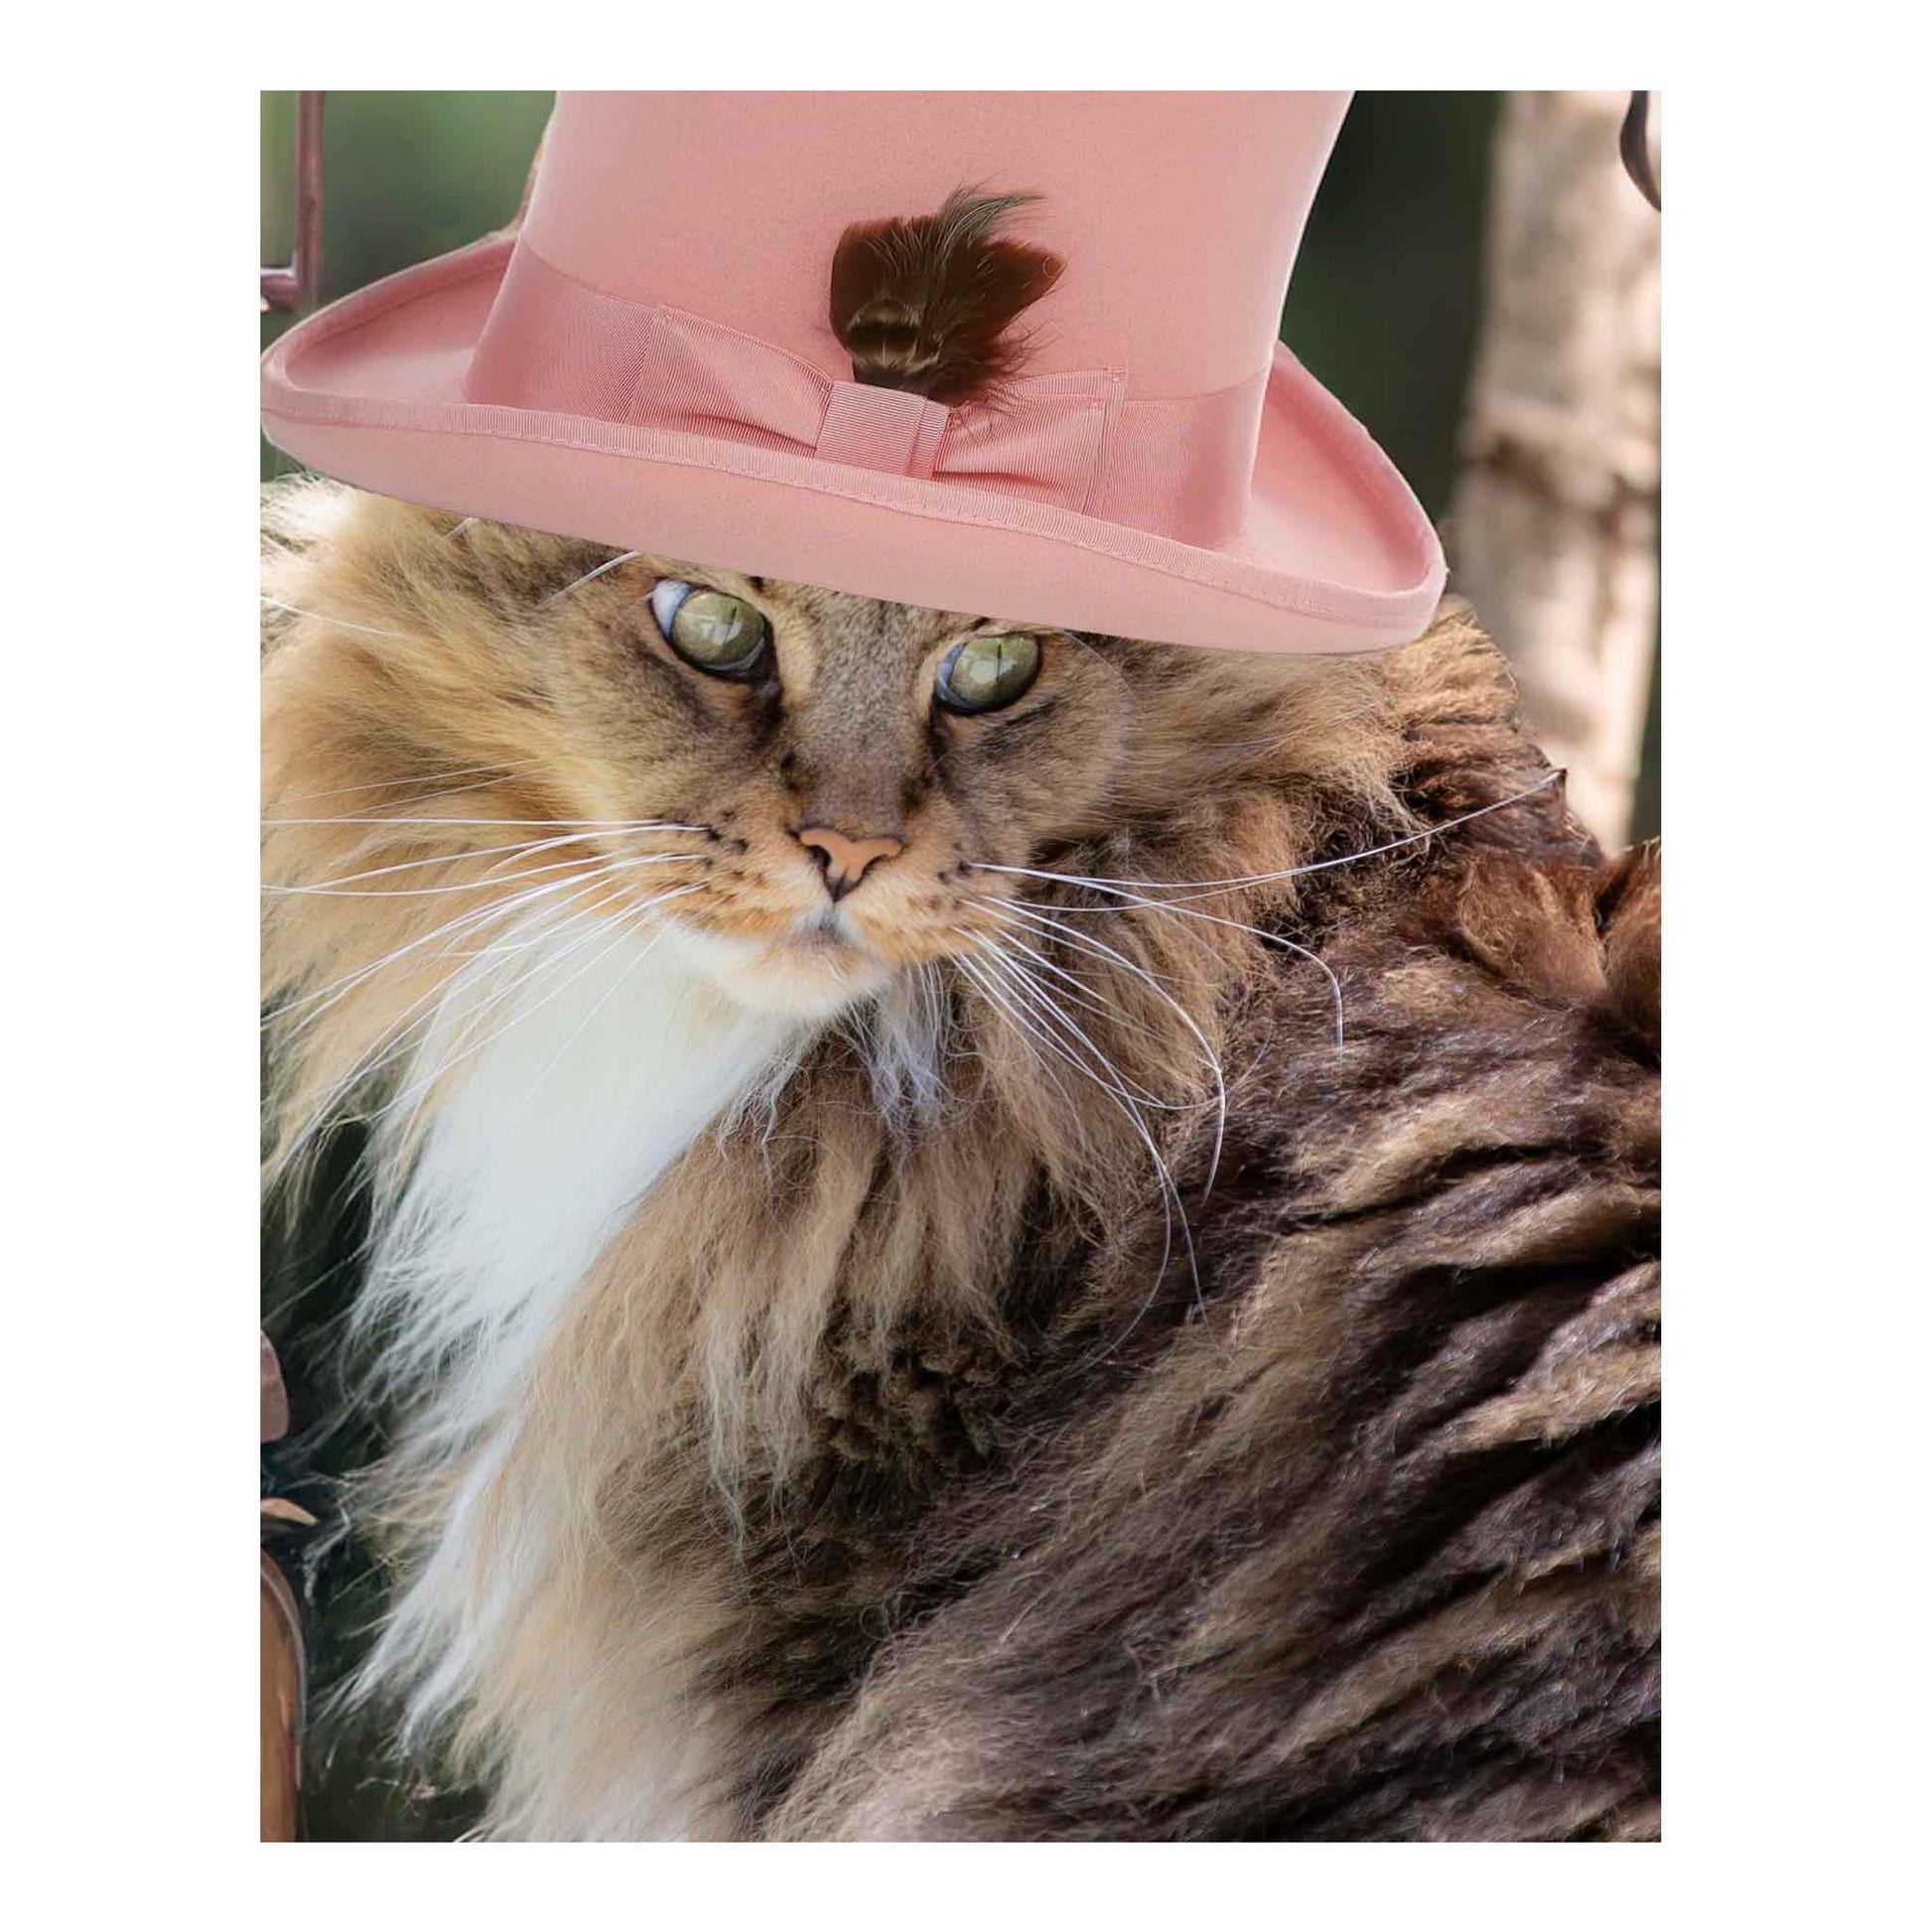 Charles Dean Carpino, photograph, Maine coon cat, computer generated background, steampunk, cat in hat, colorful, whimsical, photo, 8x10,  matted and framed 11x14